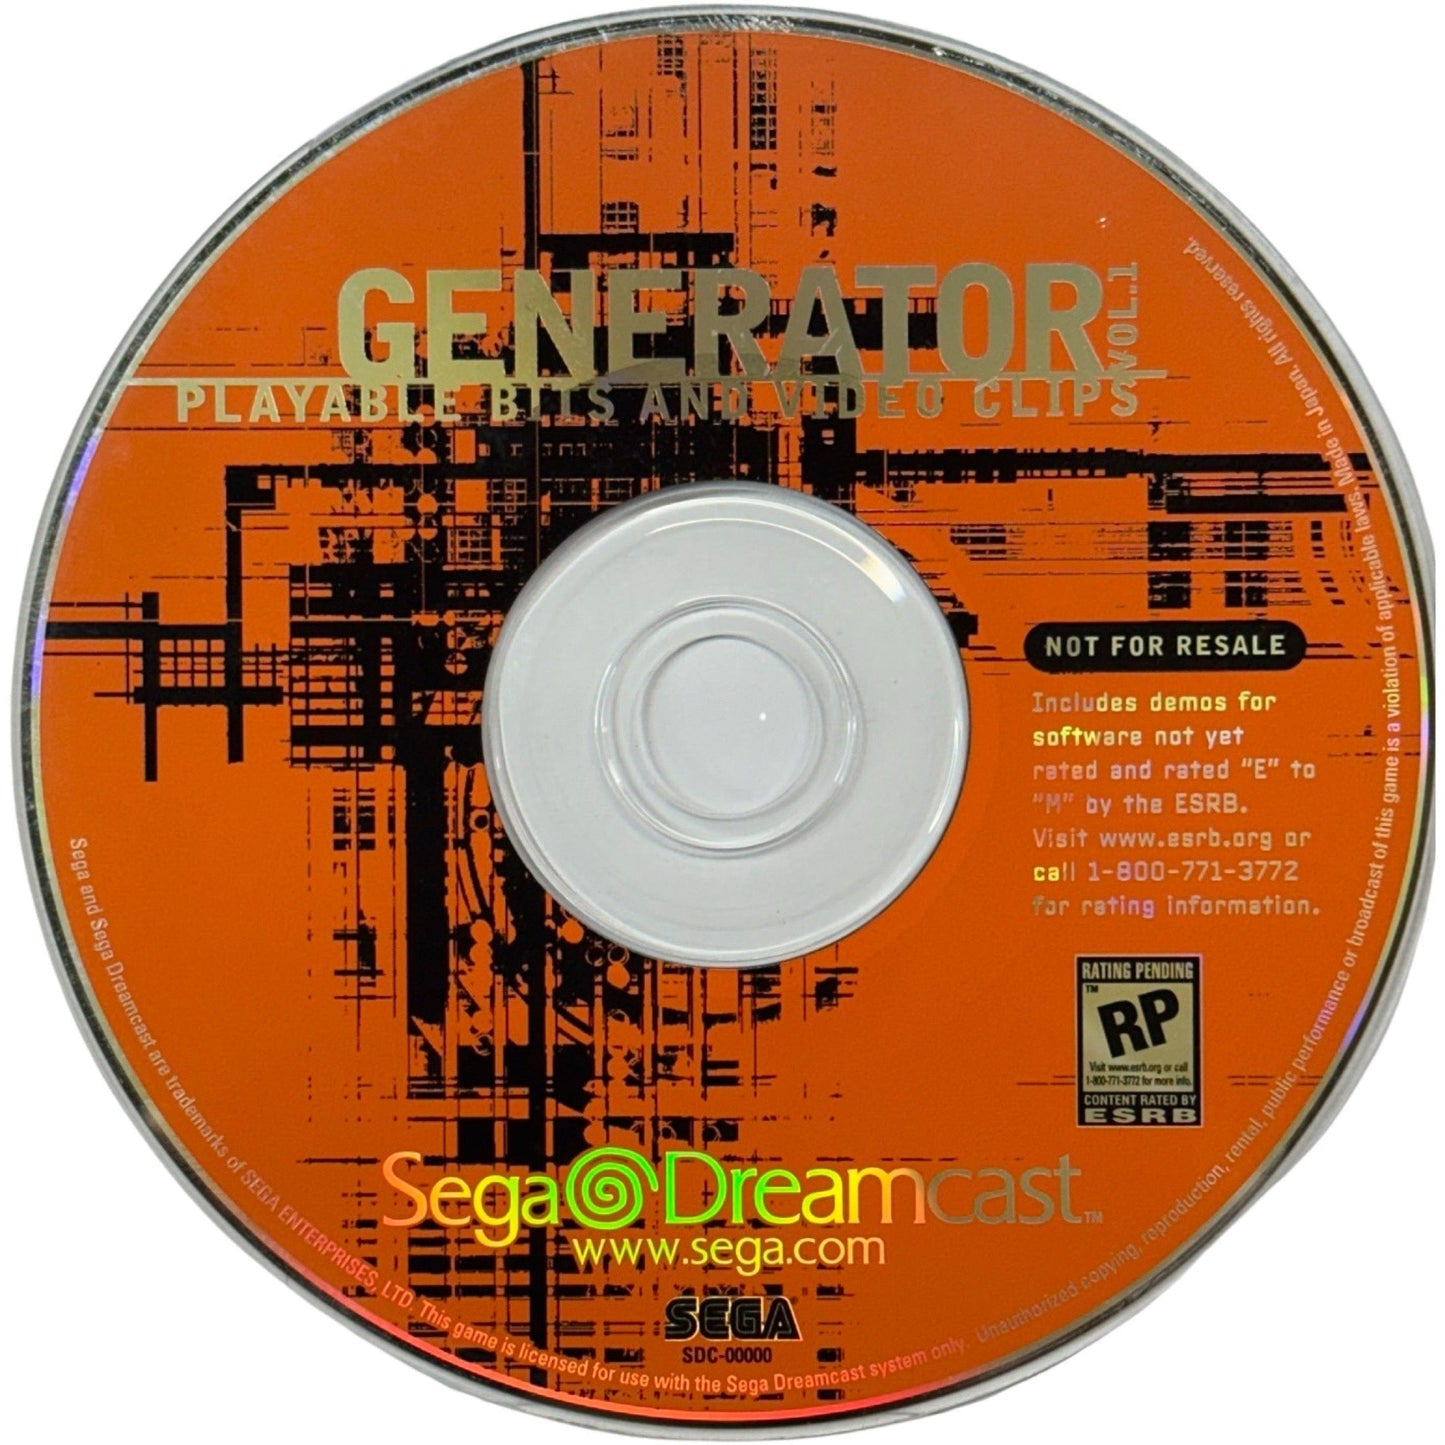 Sega Dreamcast Generator Volume 1 (Playable Bits and Video Clips (DISC ONLY)